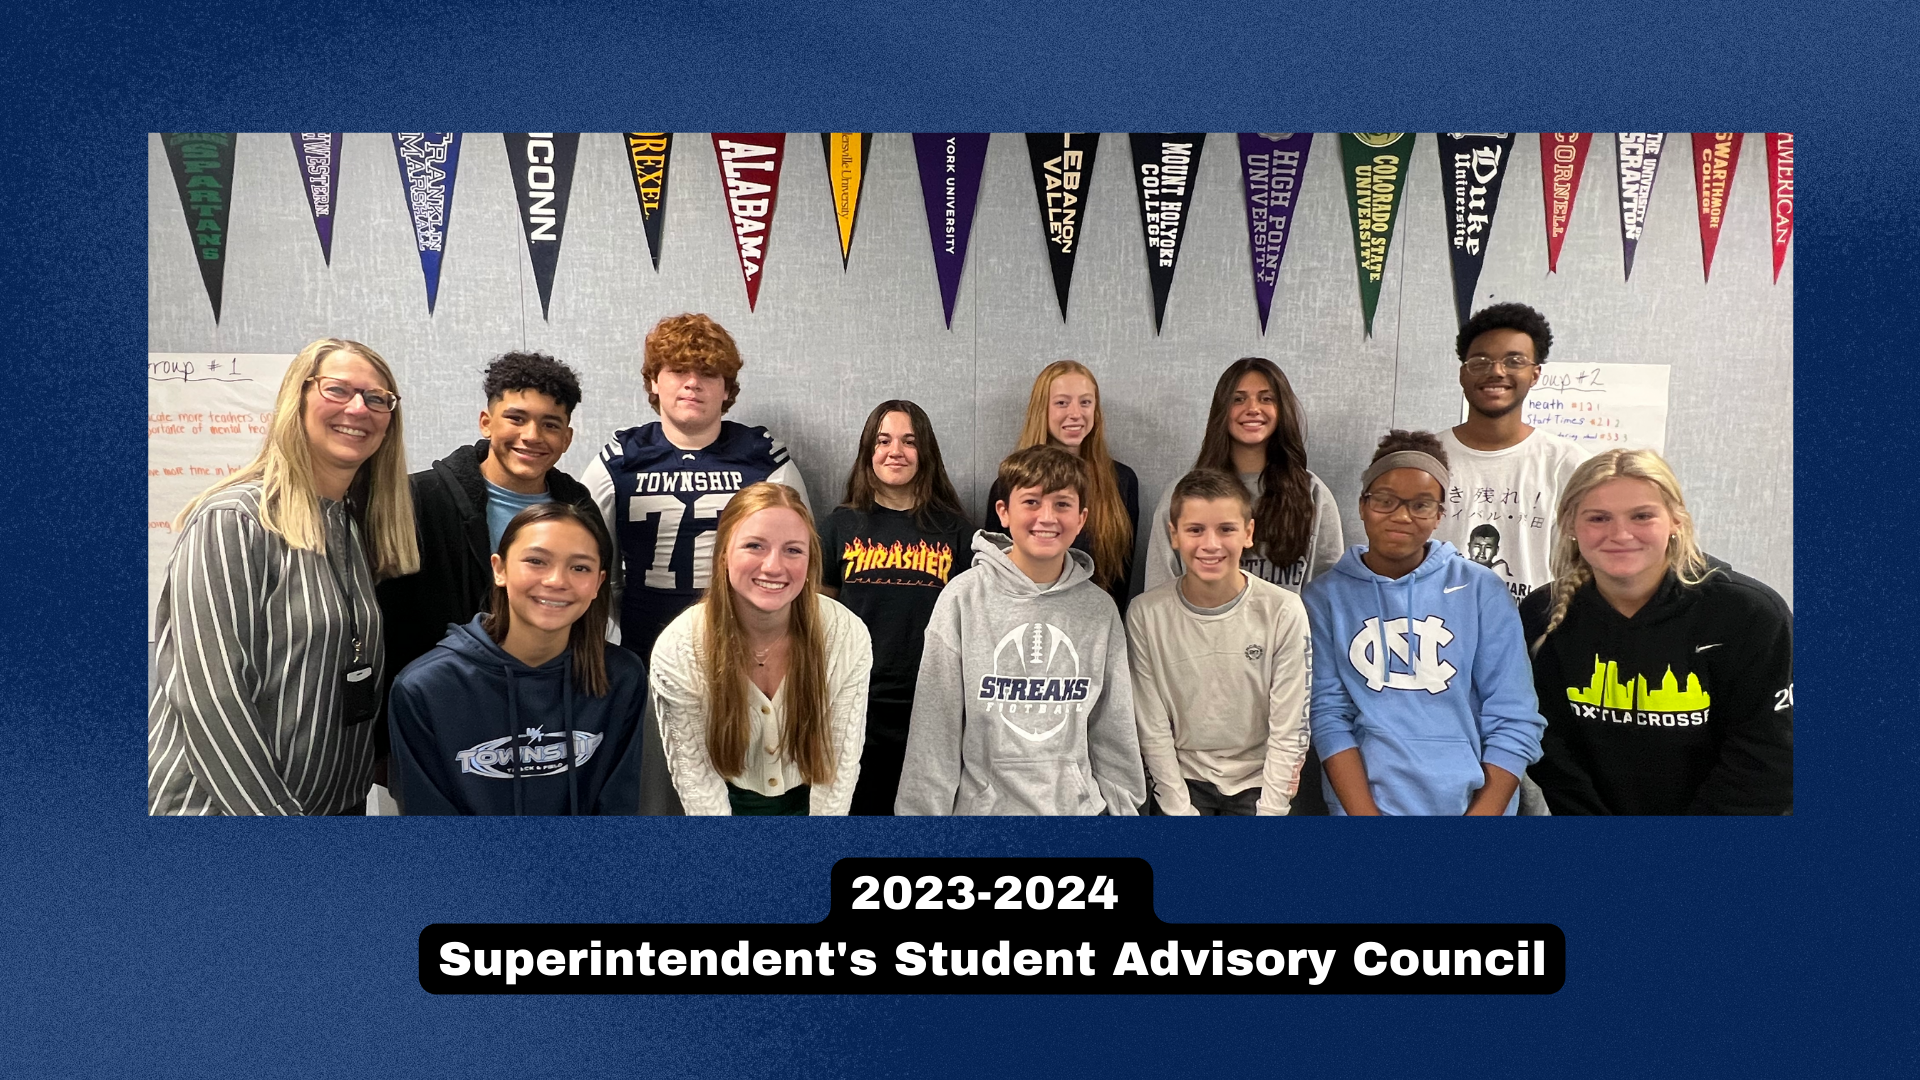 Superintendent posing with students that are apart of her Superintendent's Student Advisory Council in a classroom, with a blue border.